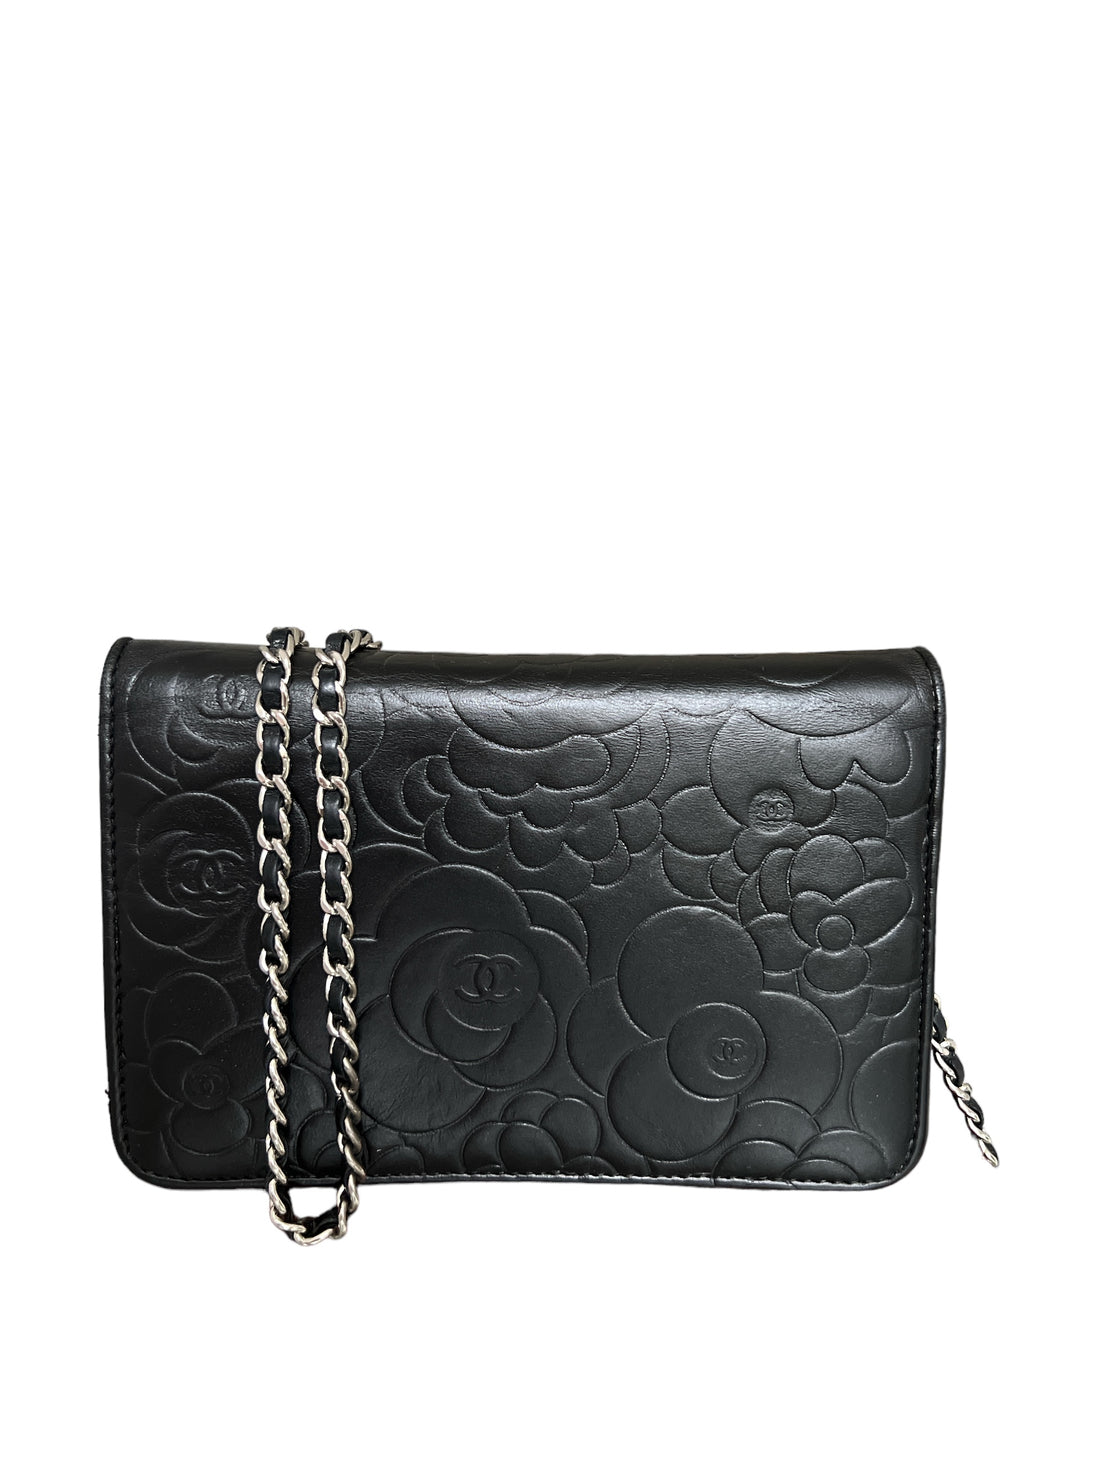 Chanel WOC Wallet on Chain Camellia